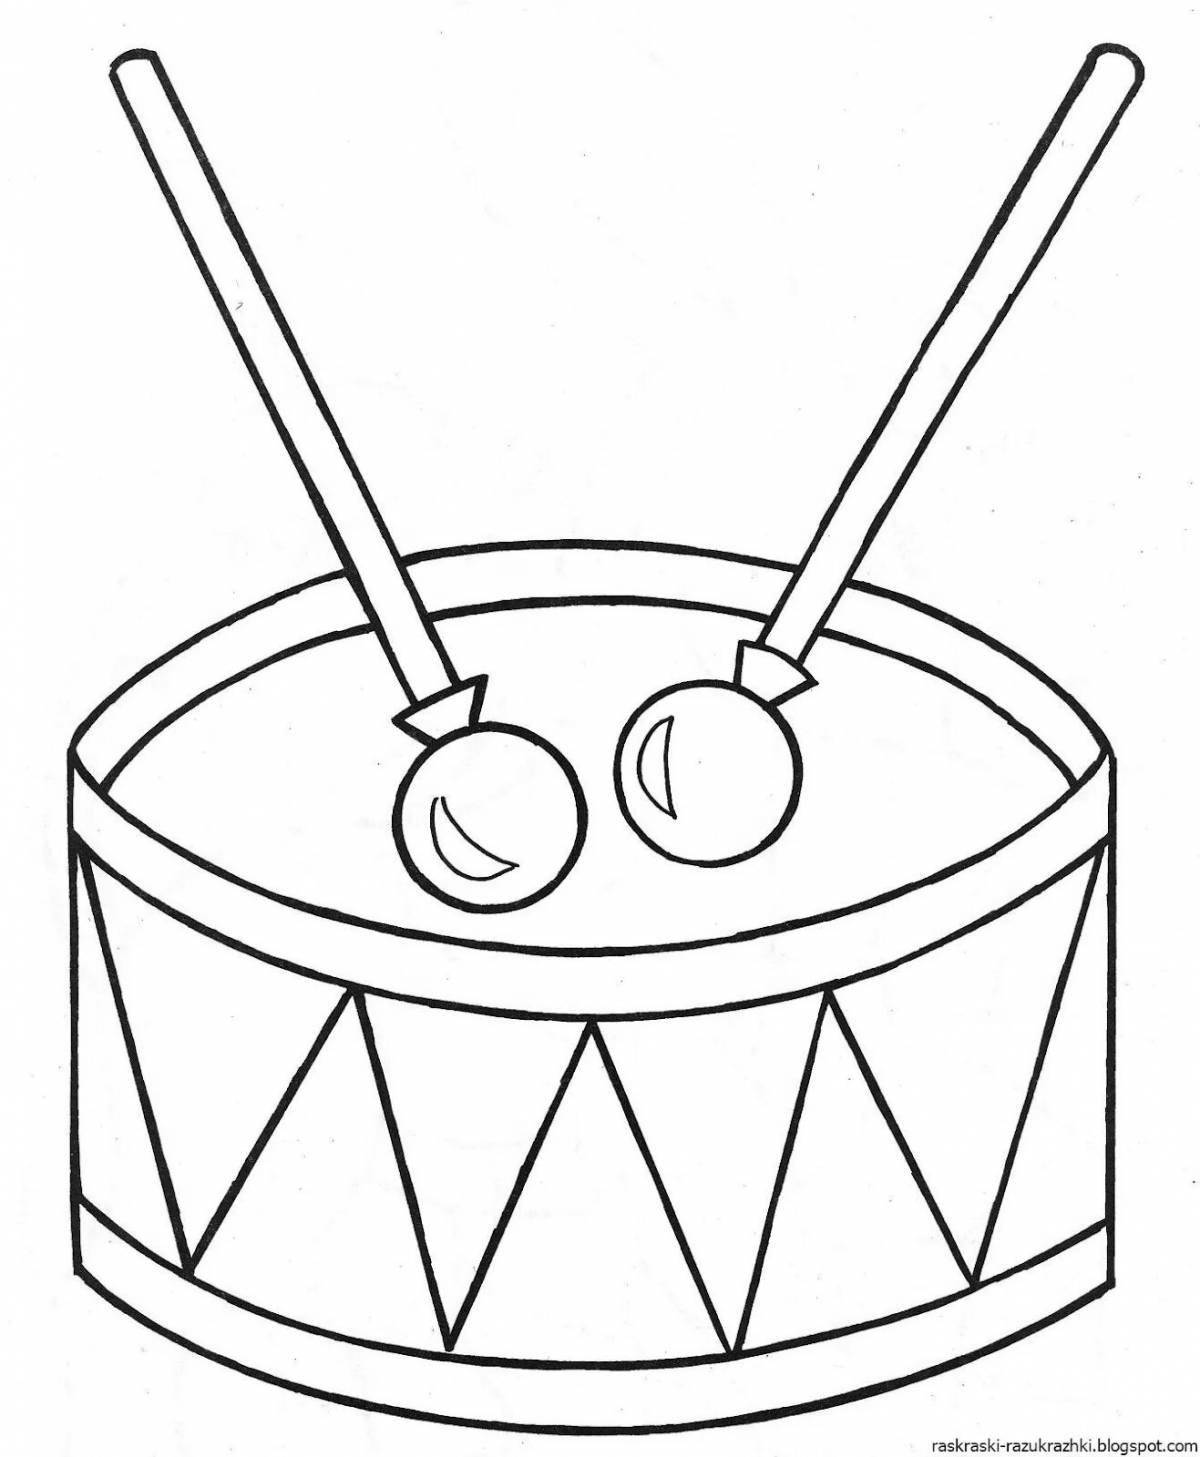 Colorful drum coloring book for 3-4 year olds